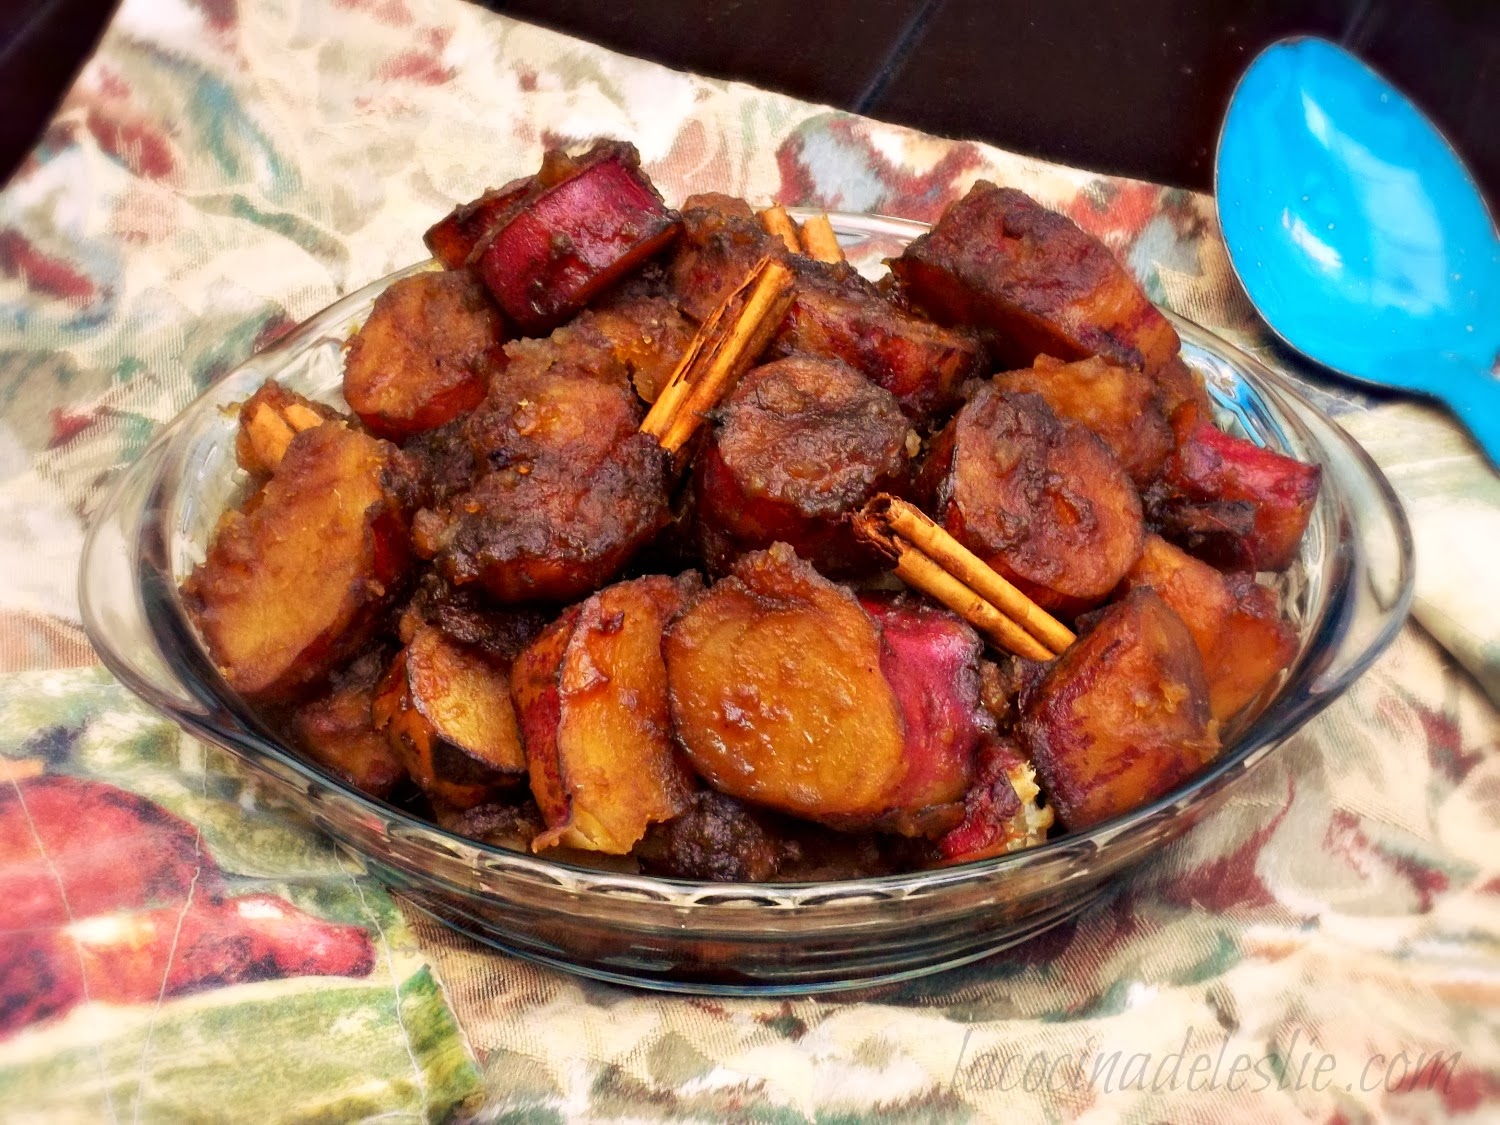 Camotes Enmielados (Mexican Candied Sweet Potatoes) #SundaySupper.